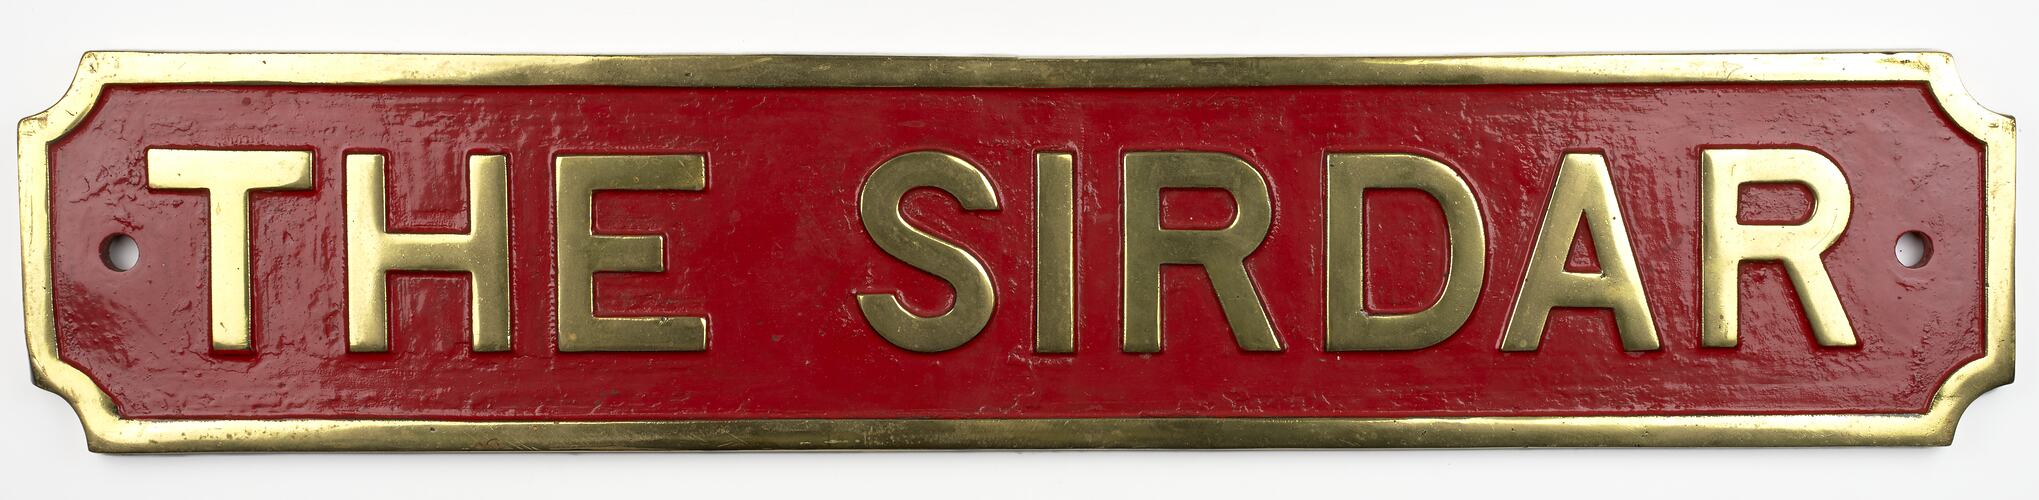 Locomotive Name Plate - Vulcan Foundry, 'The Sirdar'